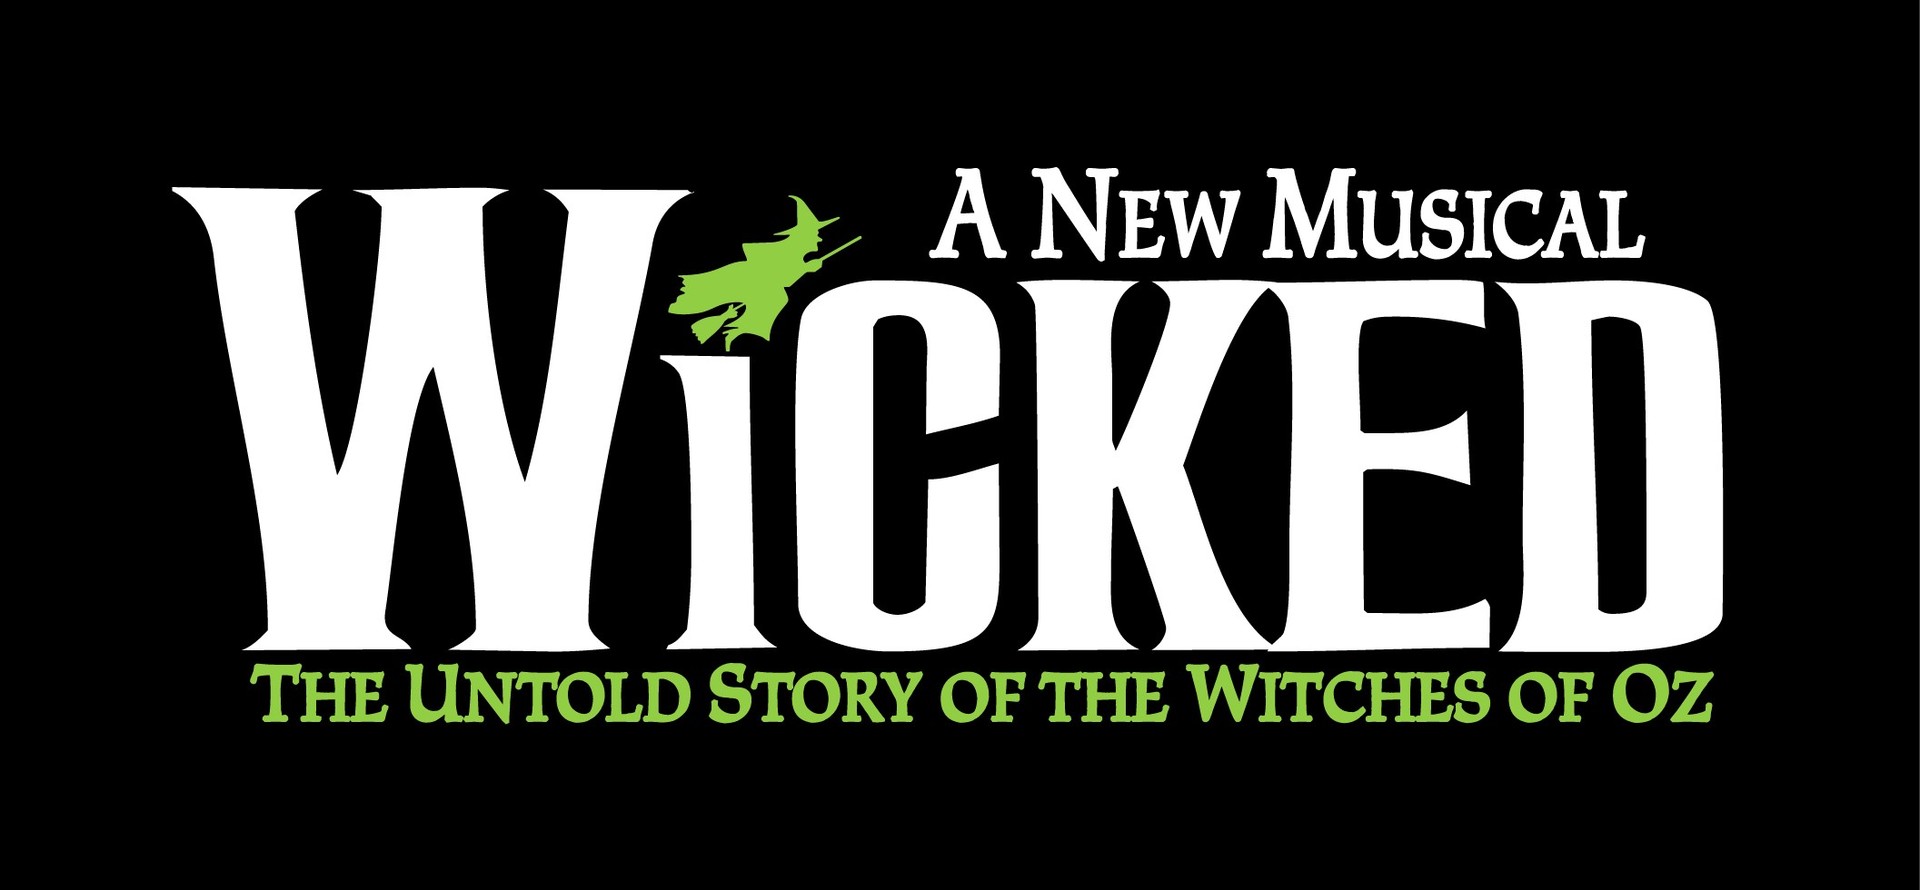 Wicked--The-Musical-wicked-257206_1920_890.jpg